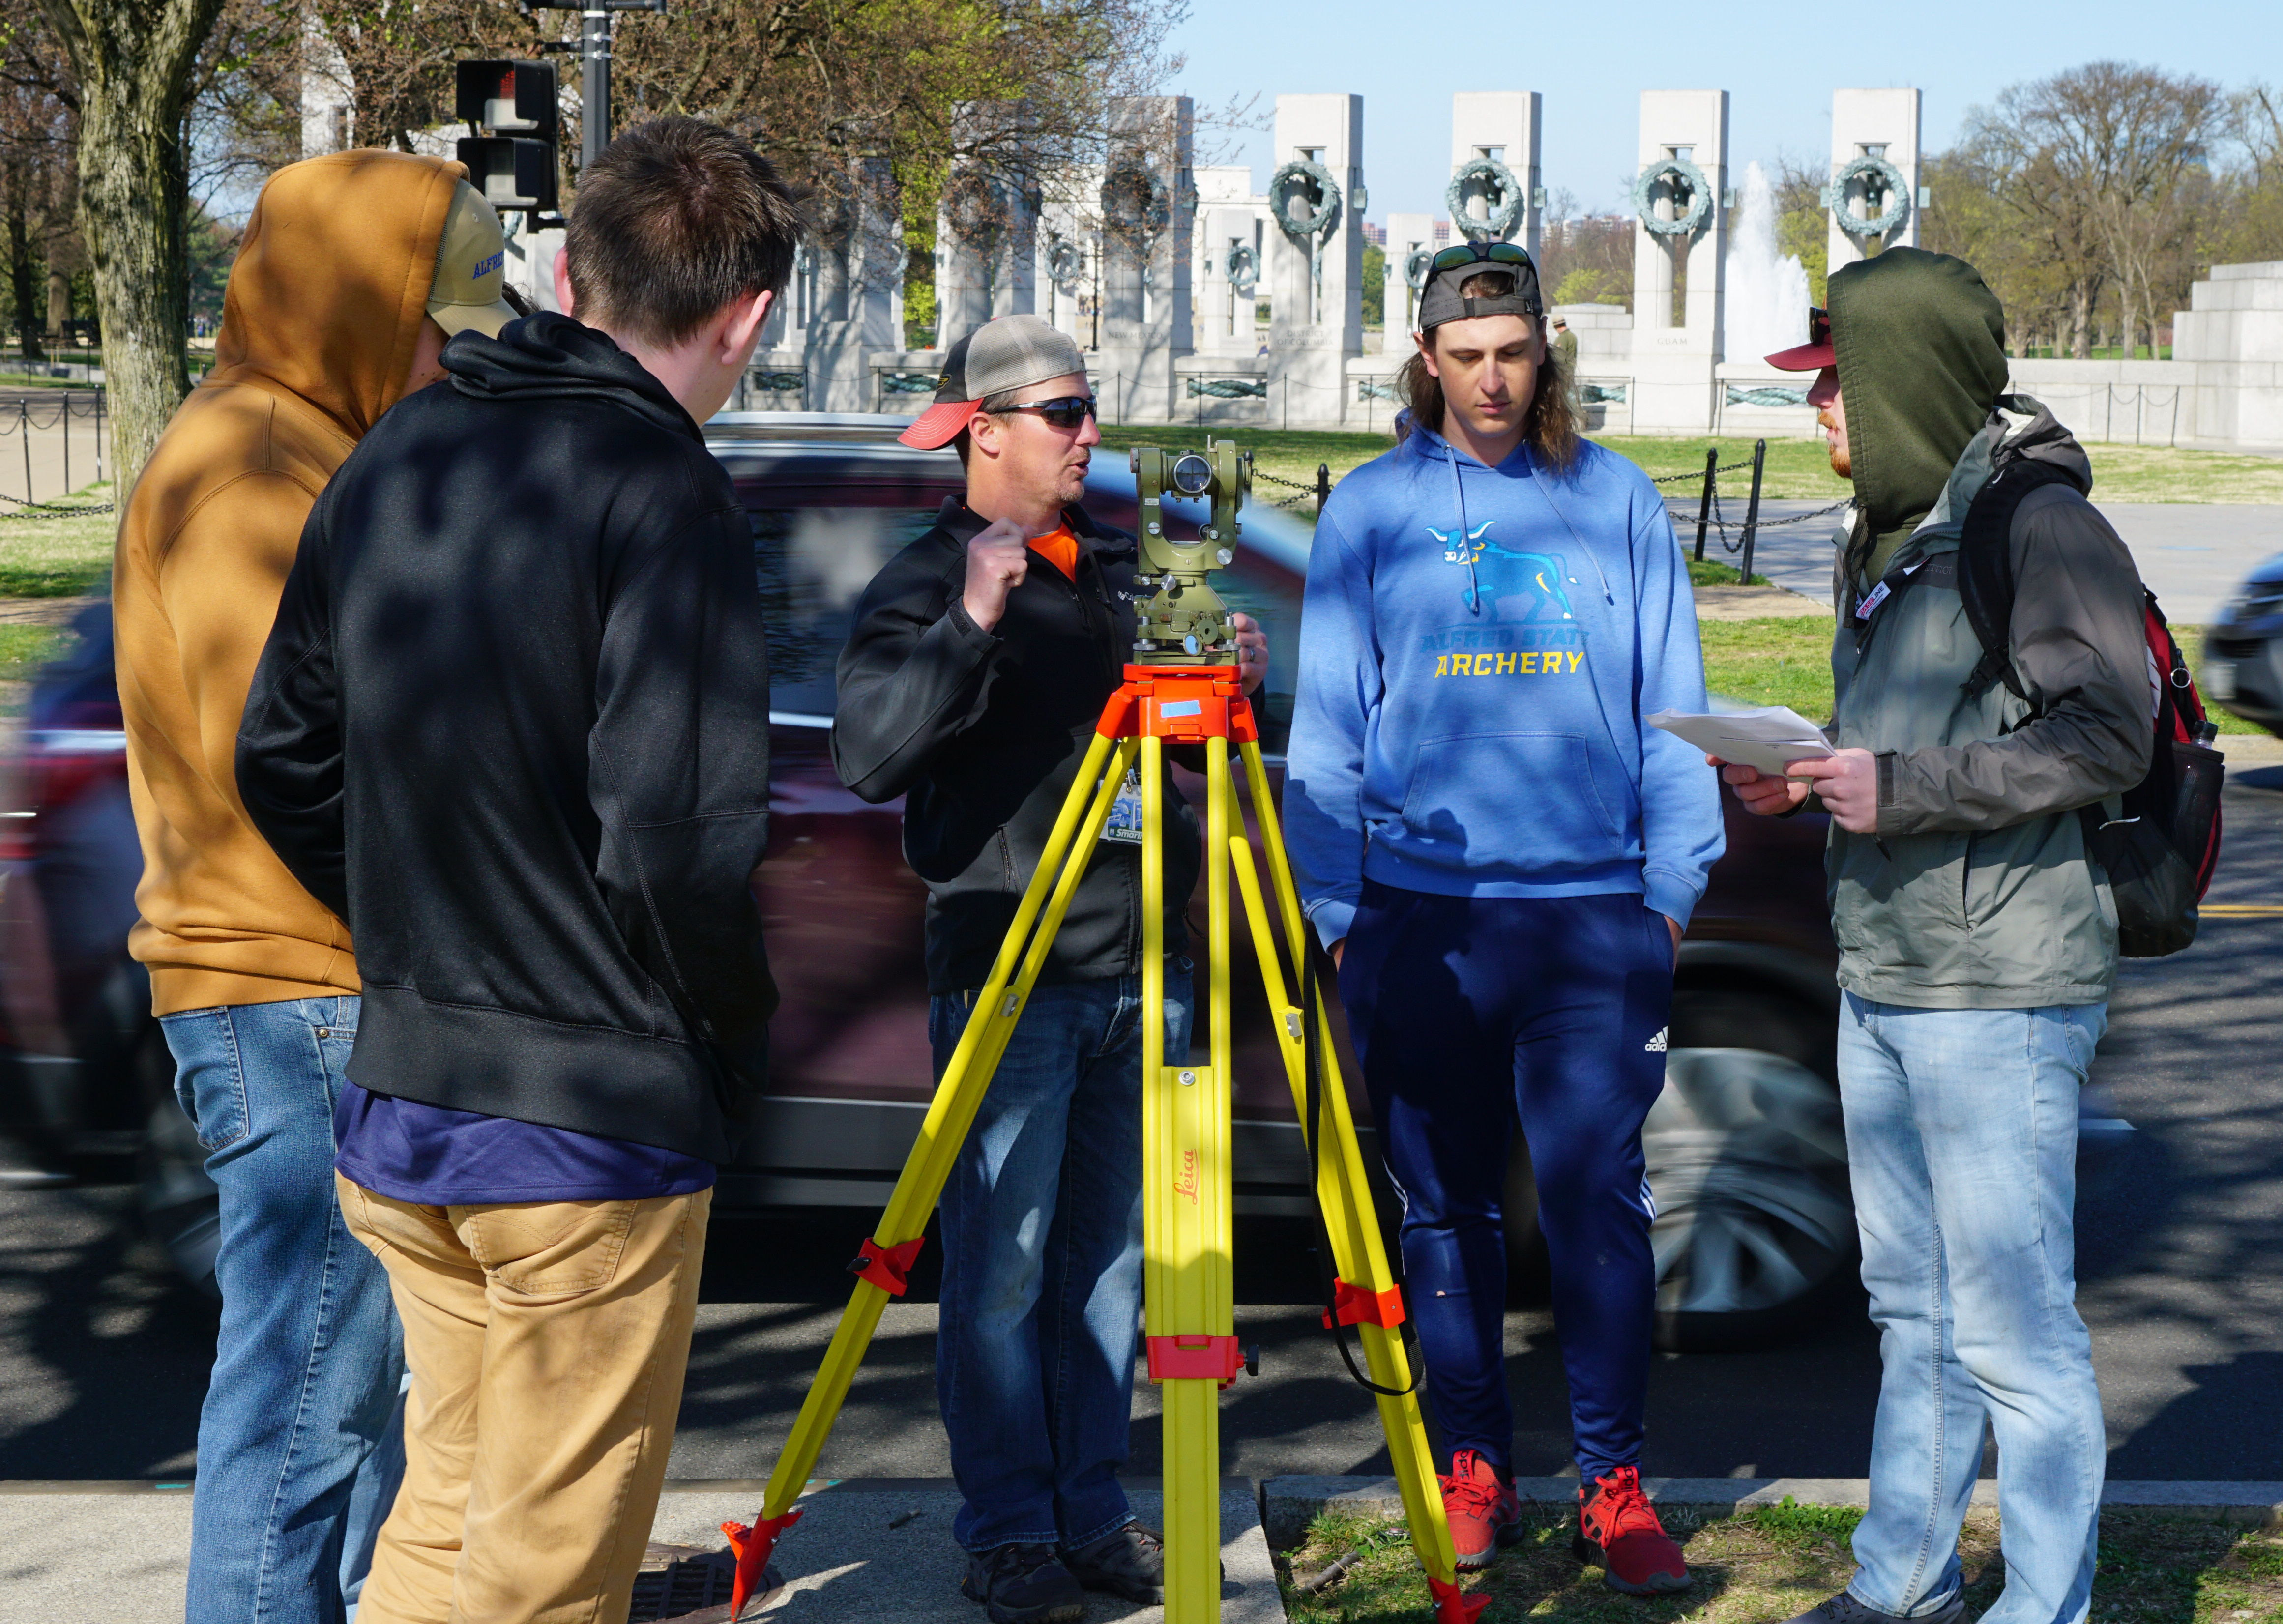 Surveying students work on a project in Washington, D.C.